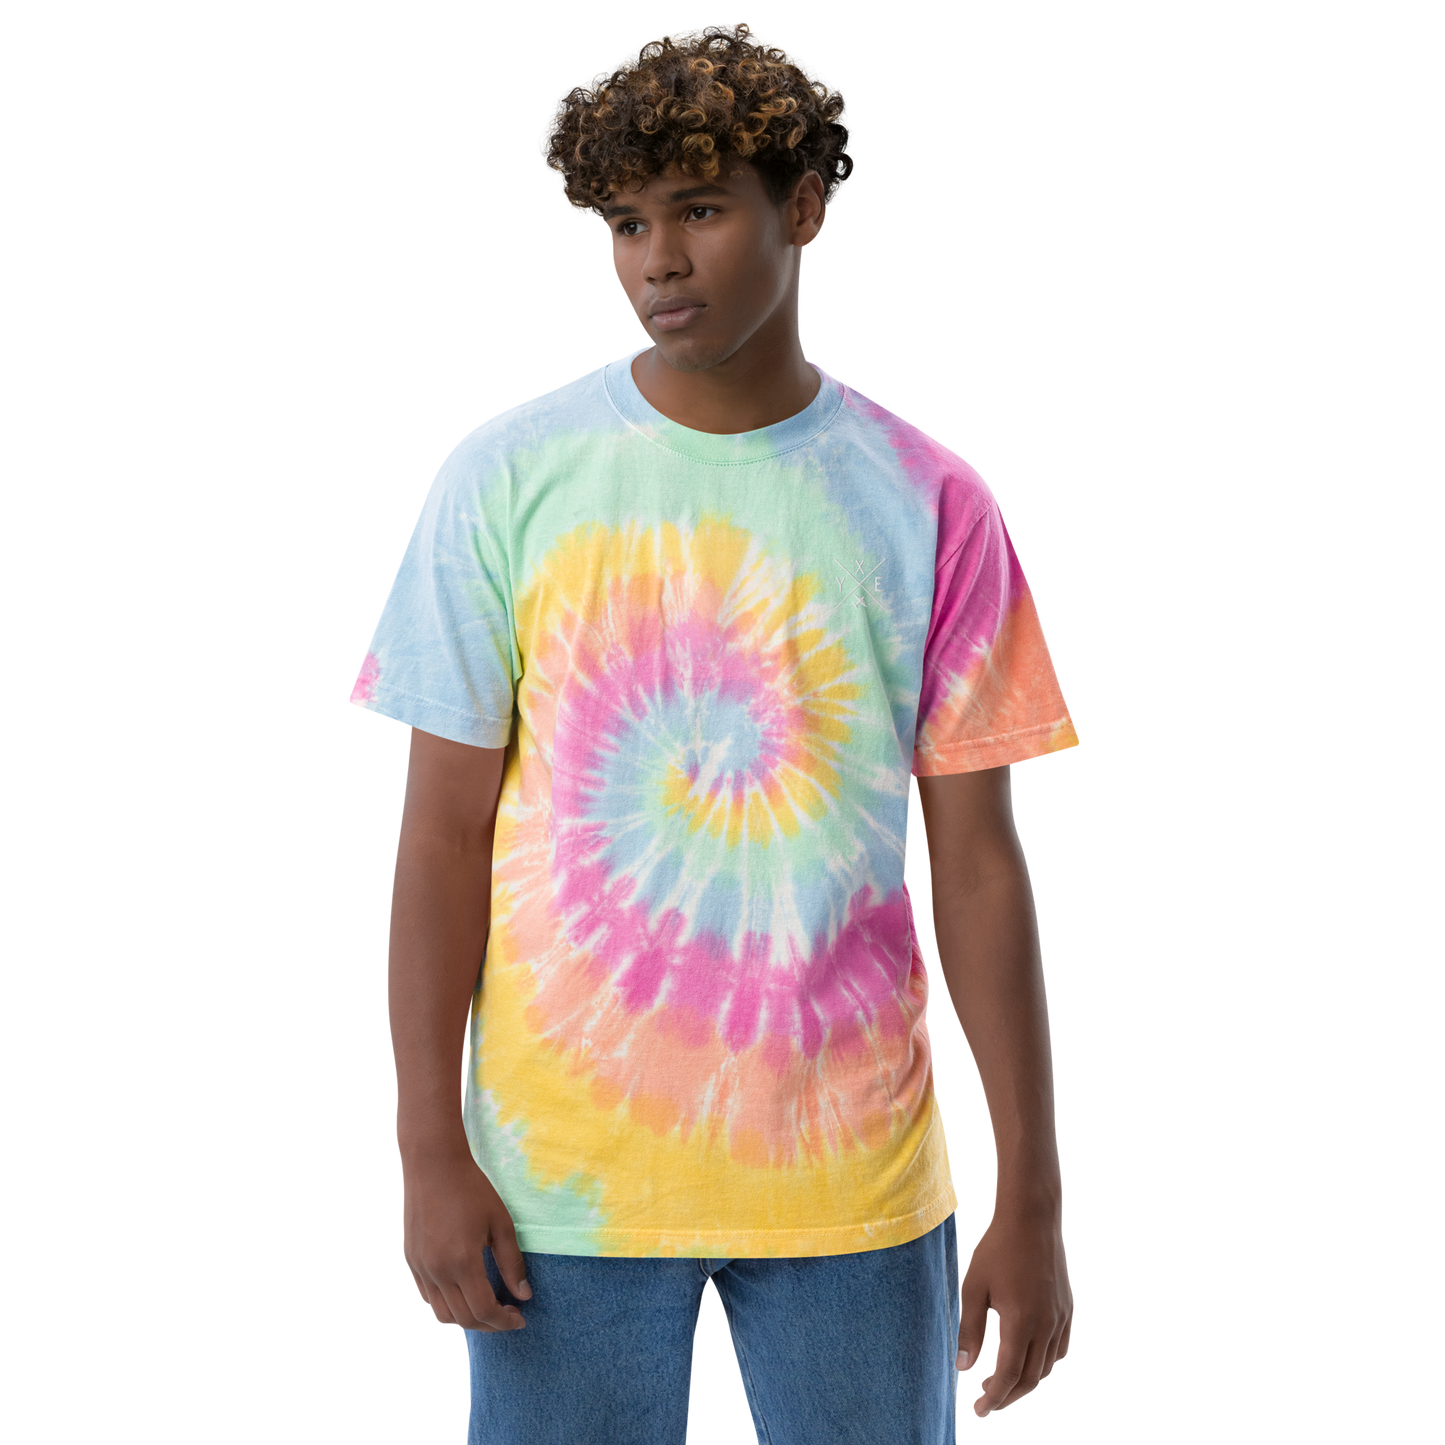 YHM Designs - YXE Saskatoon Oversized Tie-Dye T-Shirt - Crossed-X Design with Airport Code and Vintage Propliner - White Embroidery - Image 04